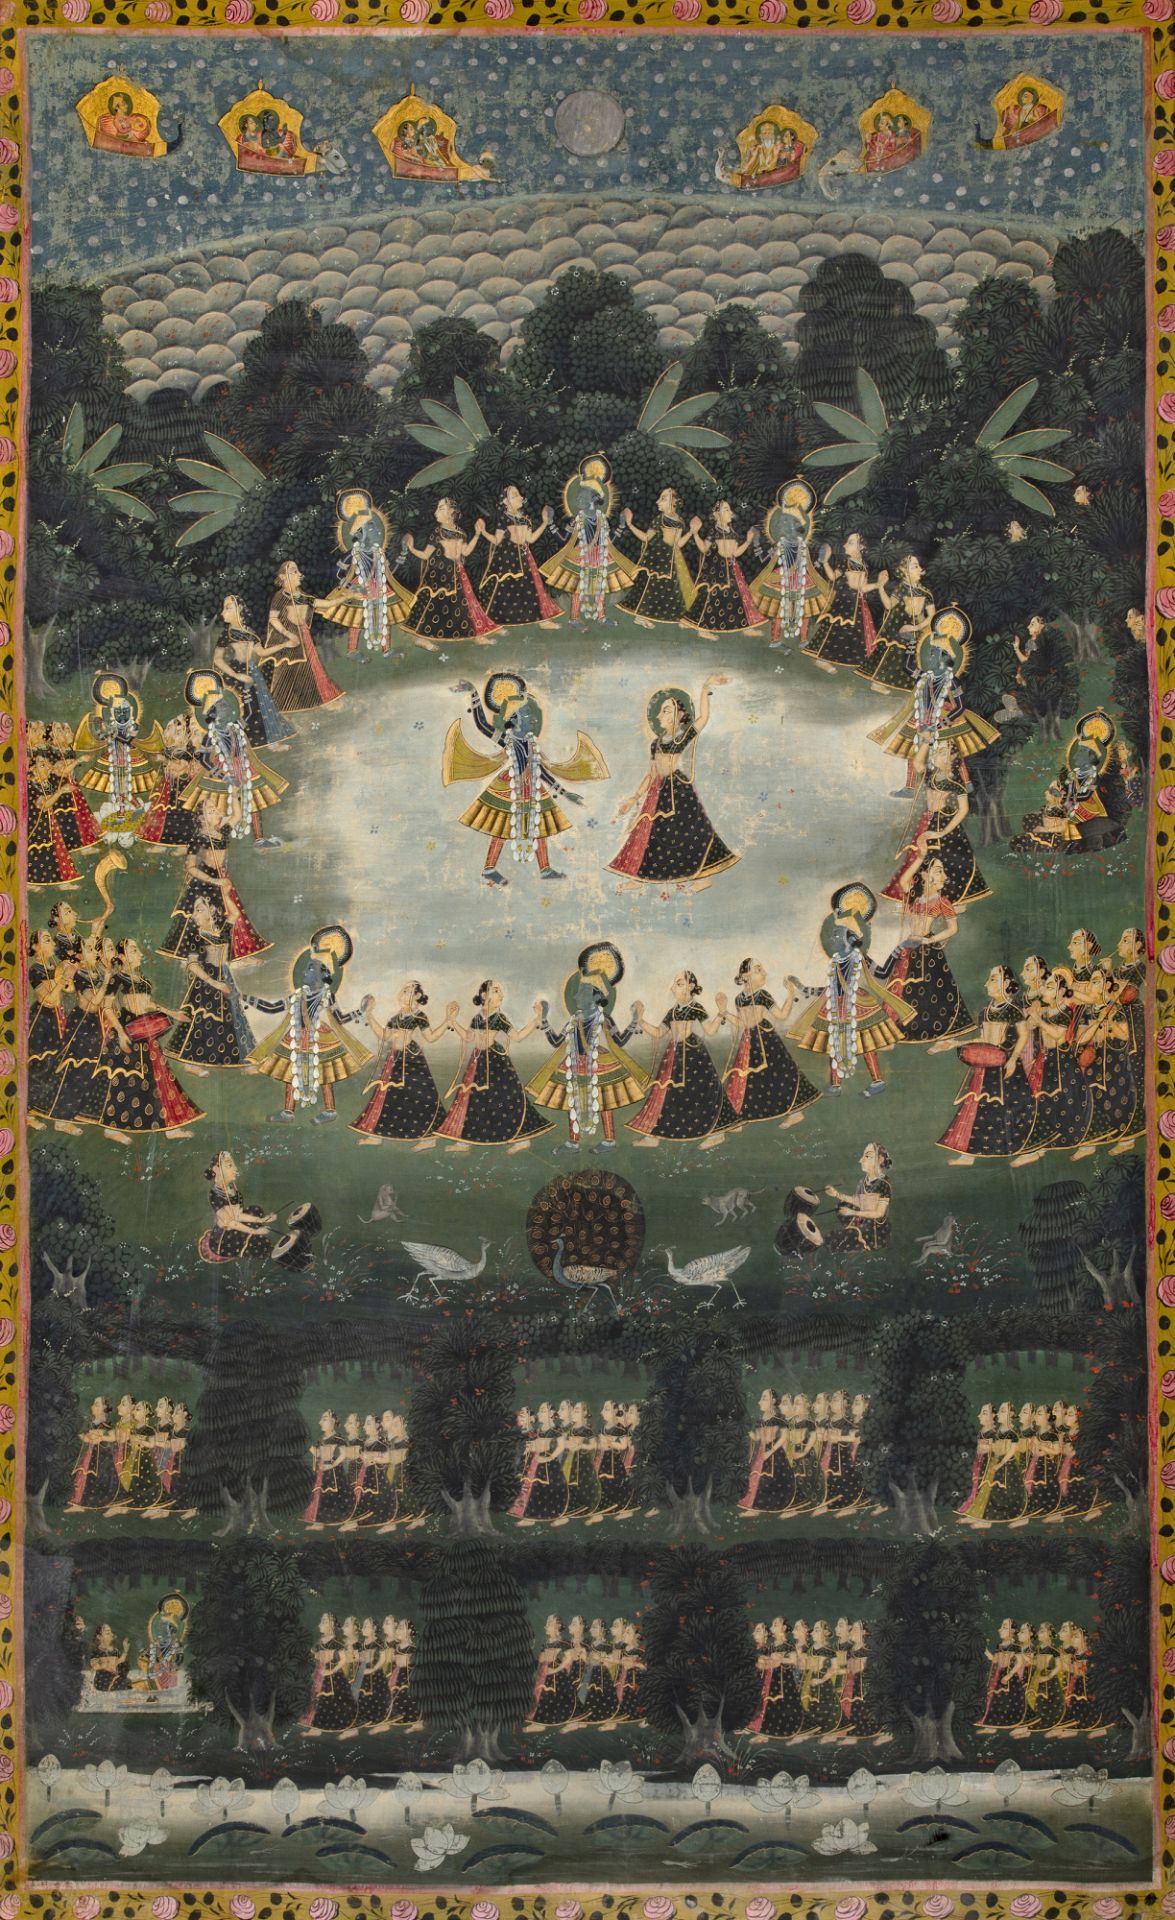 A PICCHVAI DEPICTING THE RASALILA, NORTH INDIA NATHDWARA,19TH CENTURY - Image 2 of 2